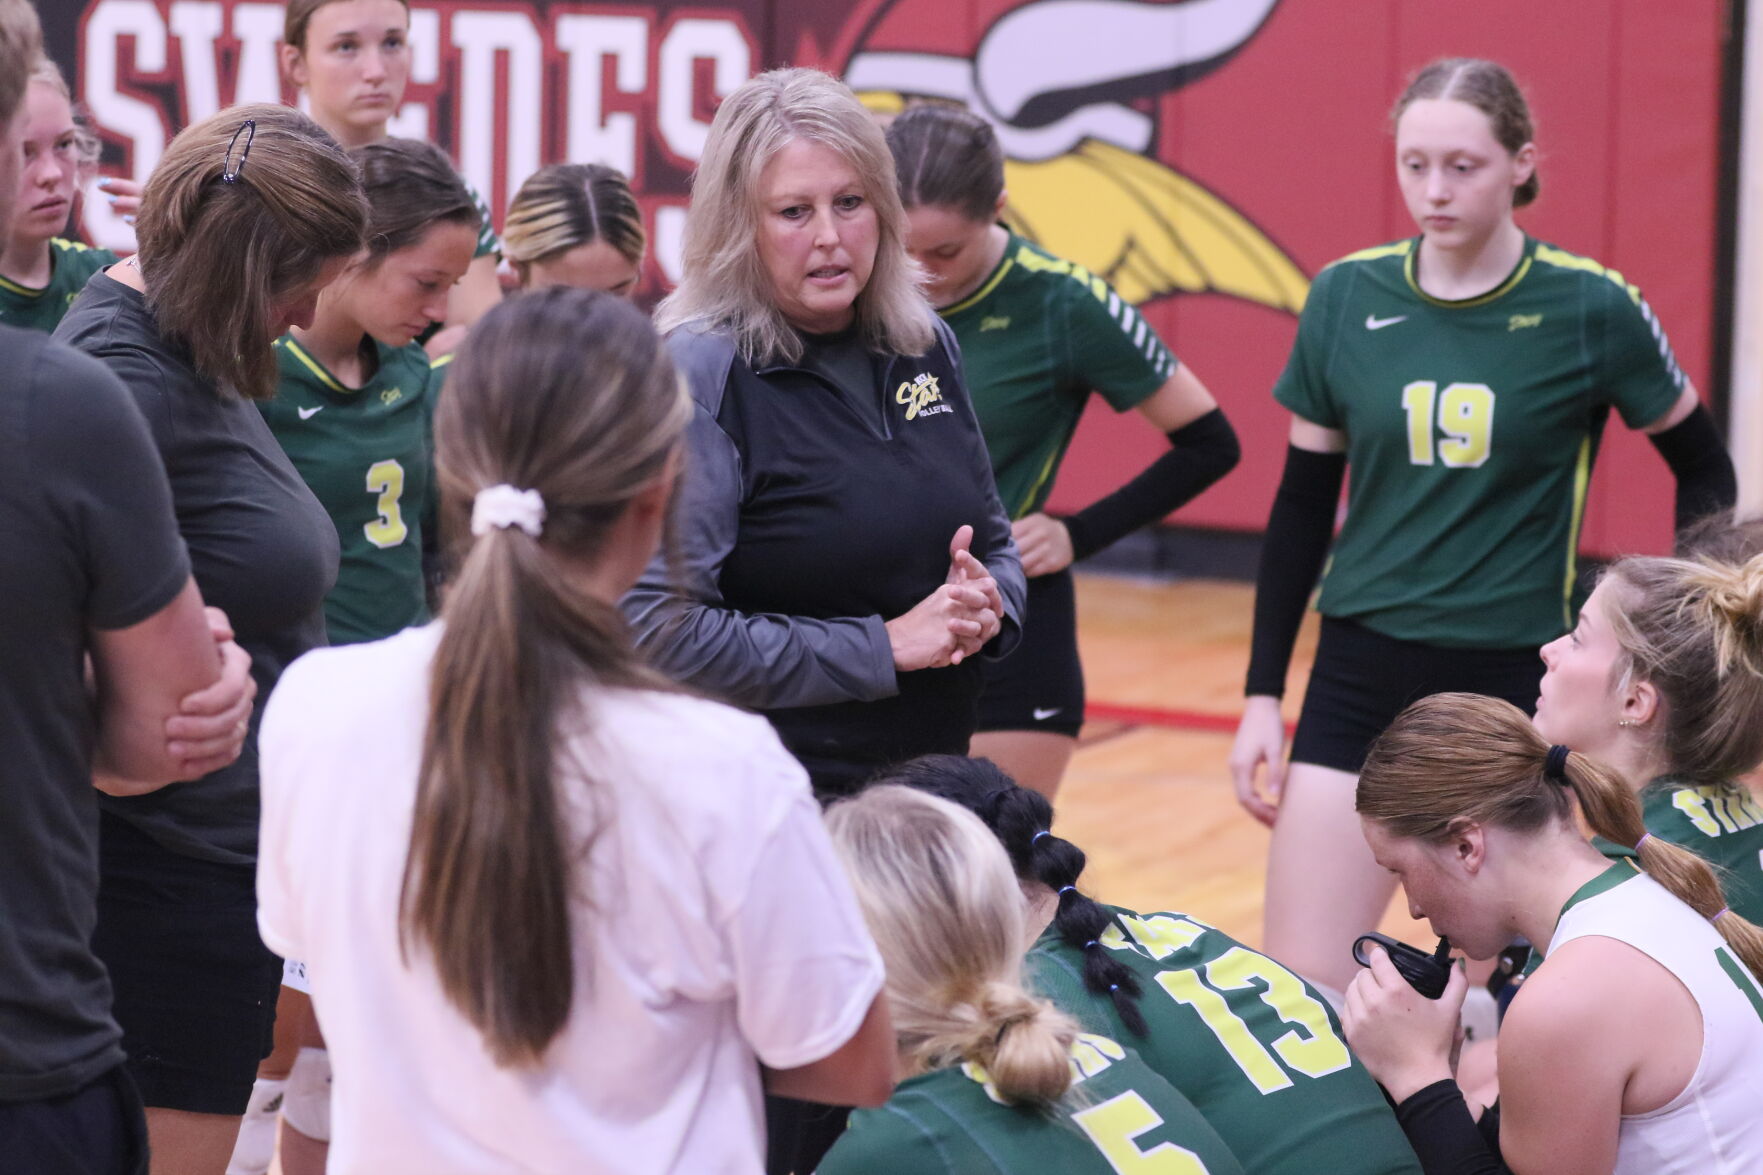 Kris Conner Steps Down After 32 Years as Kearney Catholic Volleyball Coach